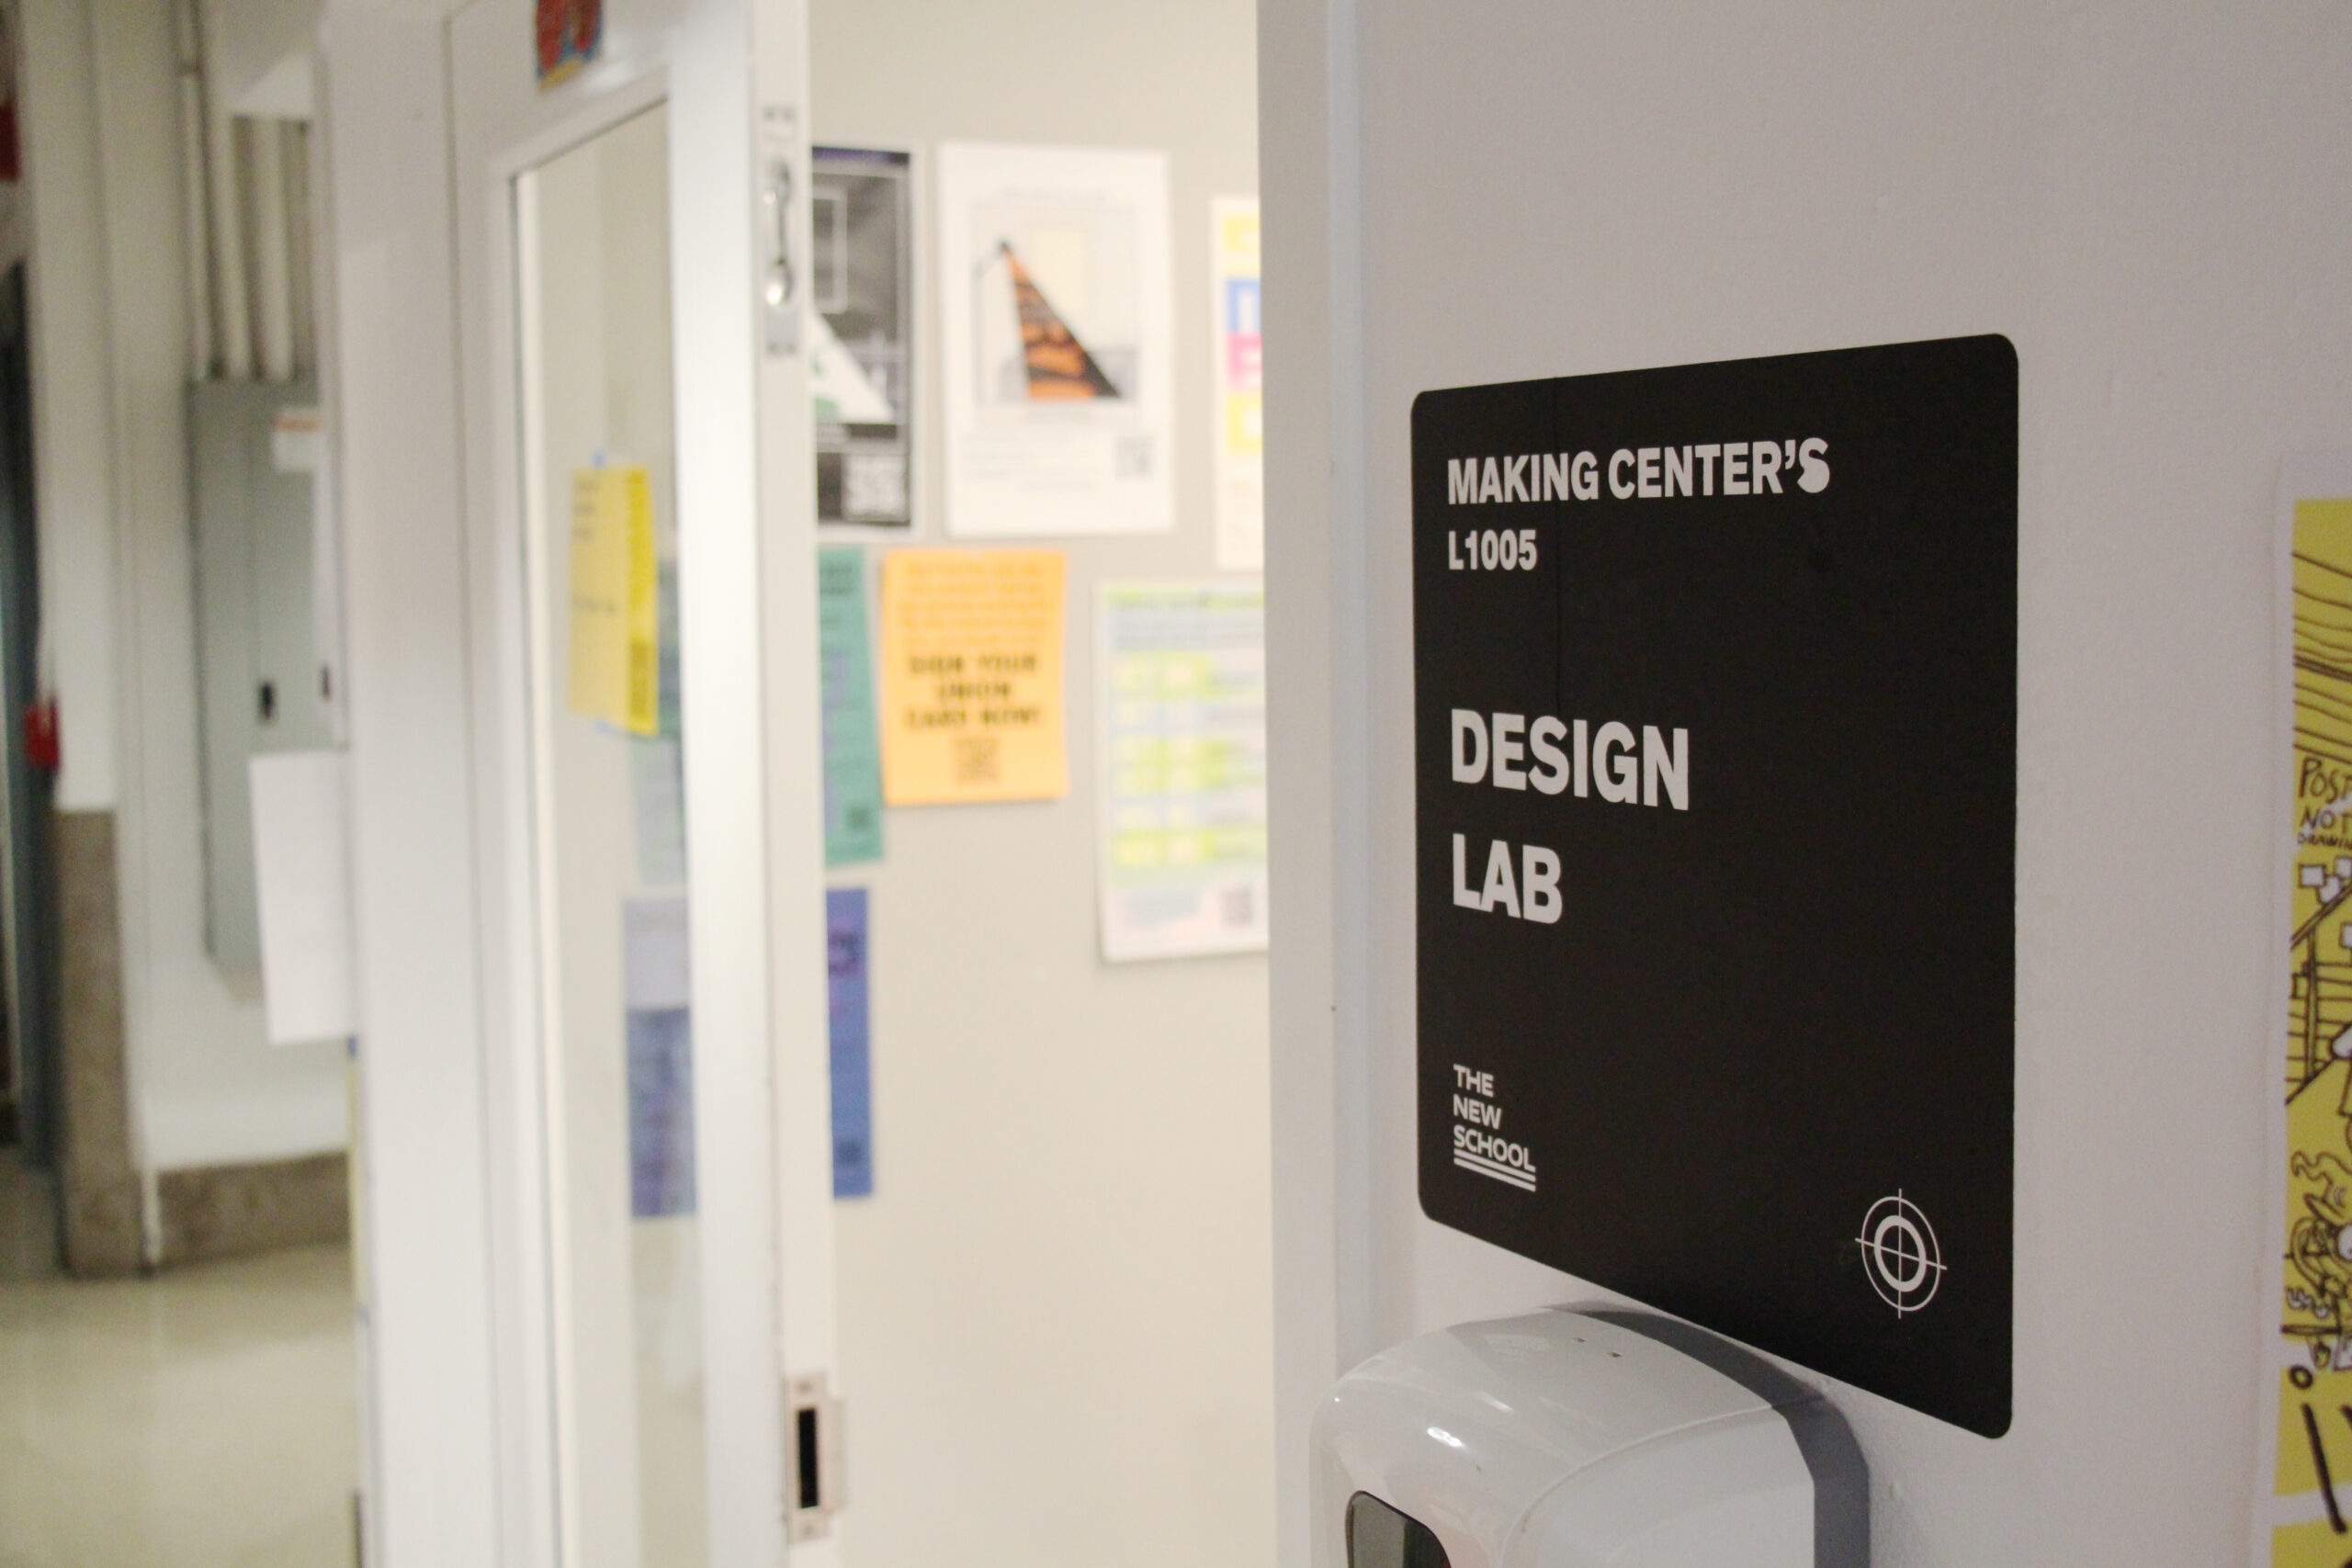 A sign outside of the design lab with a black background and white lettering that reads "Design Lab"